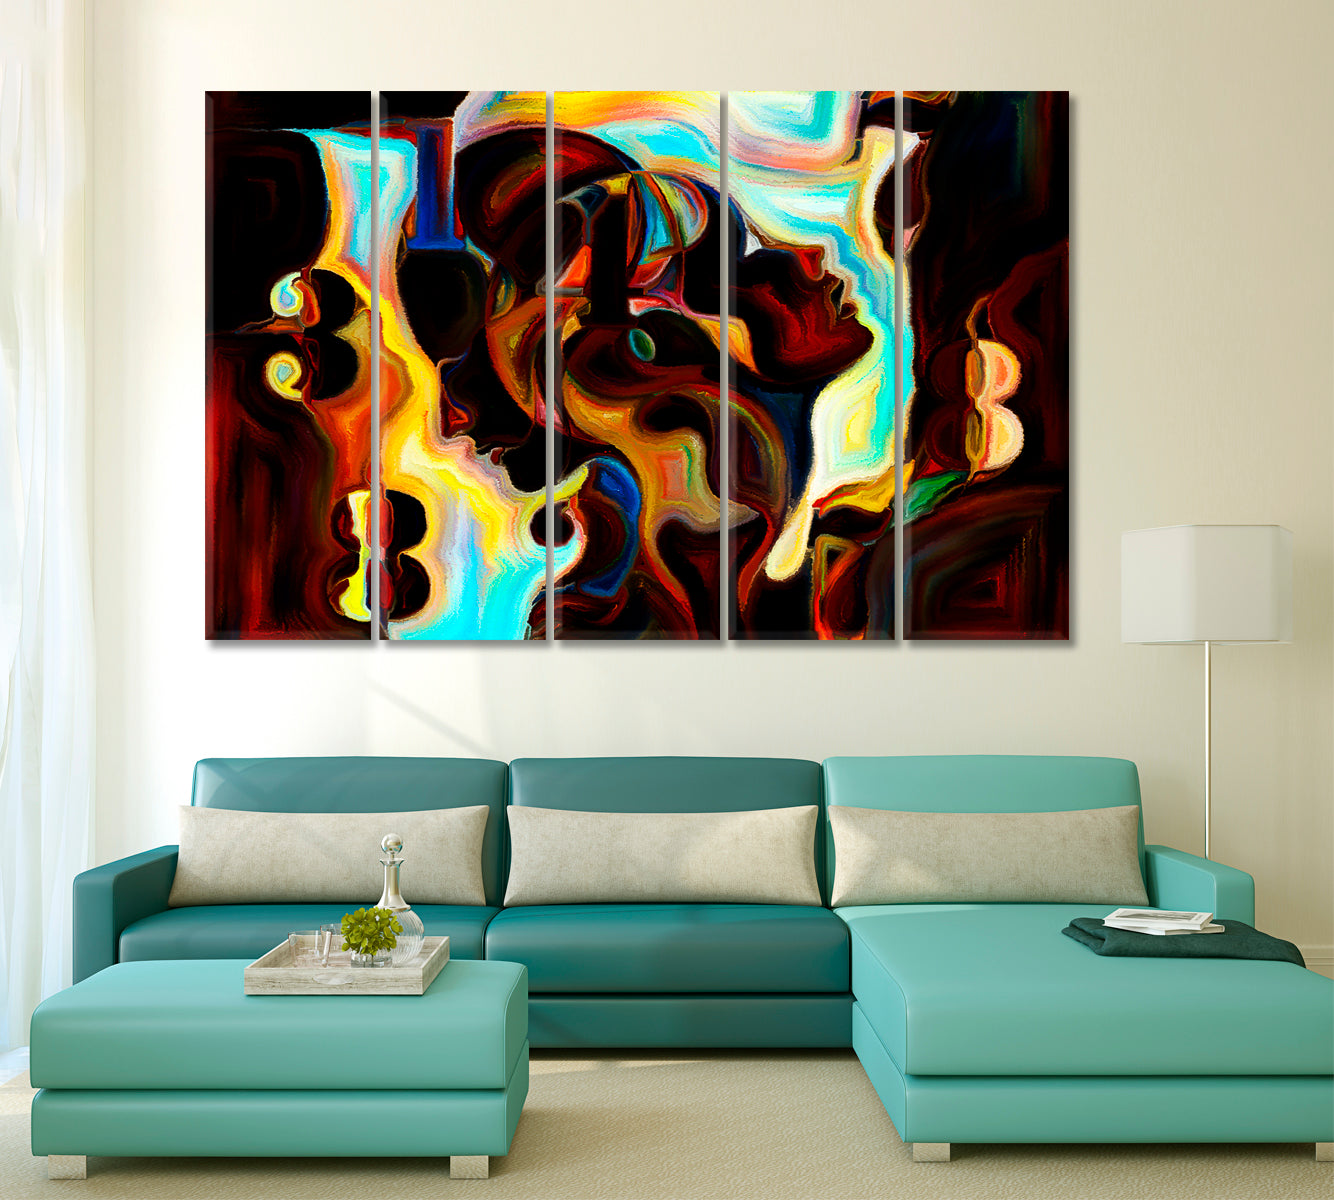 Abstract Forms Shapes Unique Design Wall Art Canvas Print Contemporary Art Artesty 5 panels 36" x 24" 